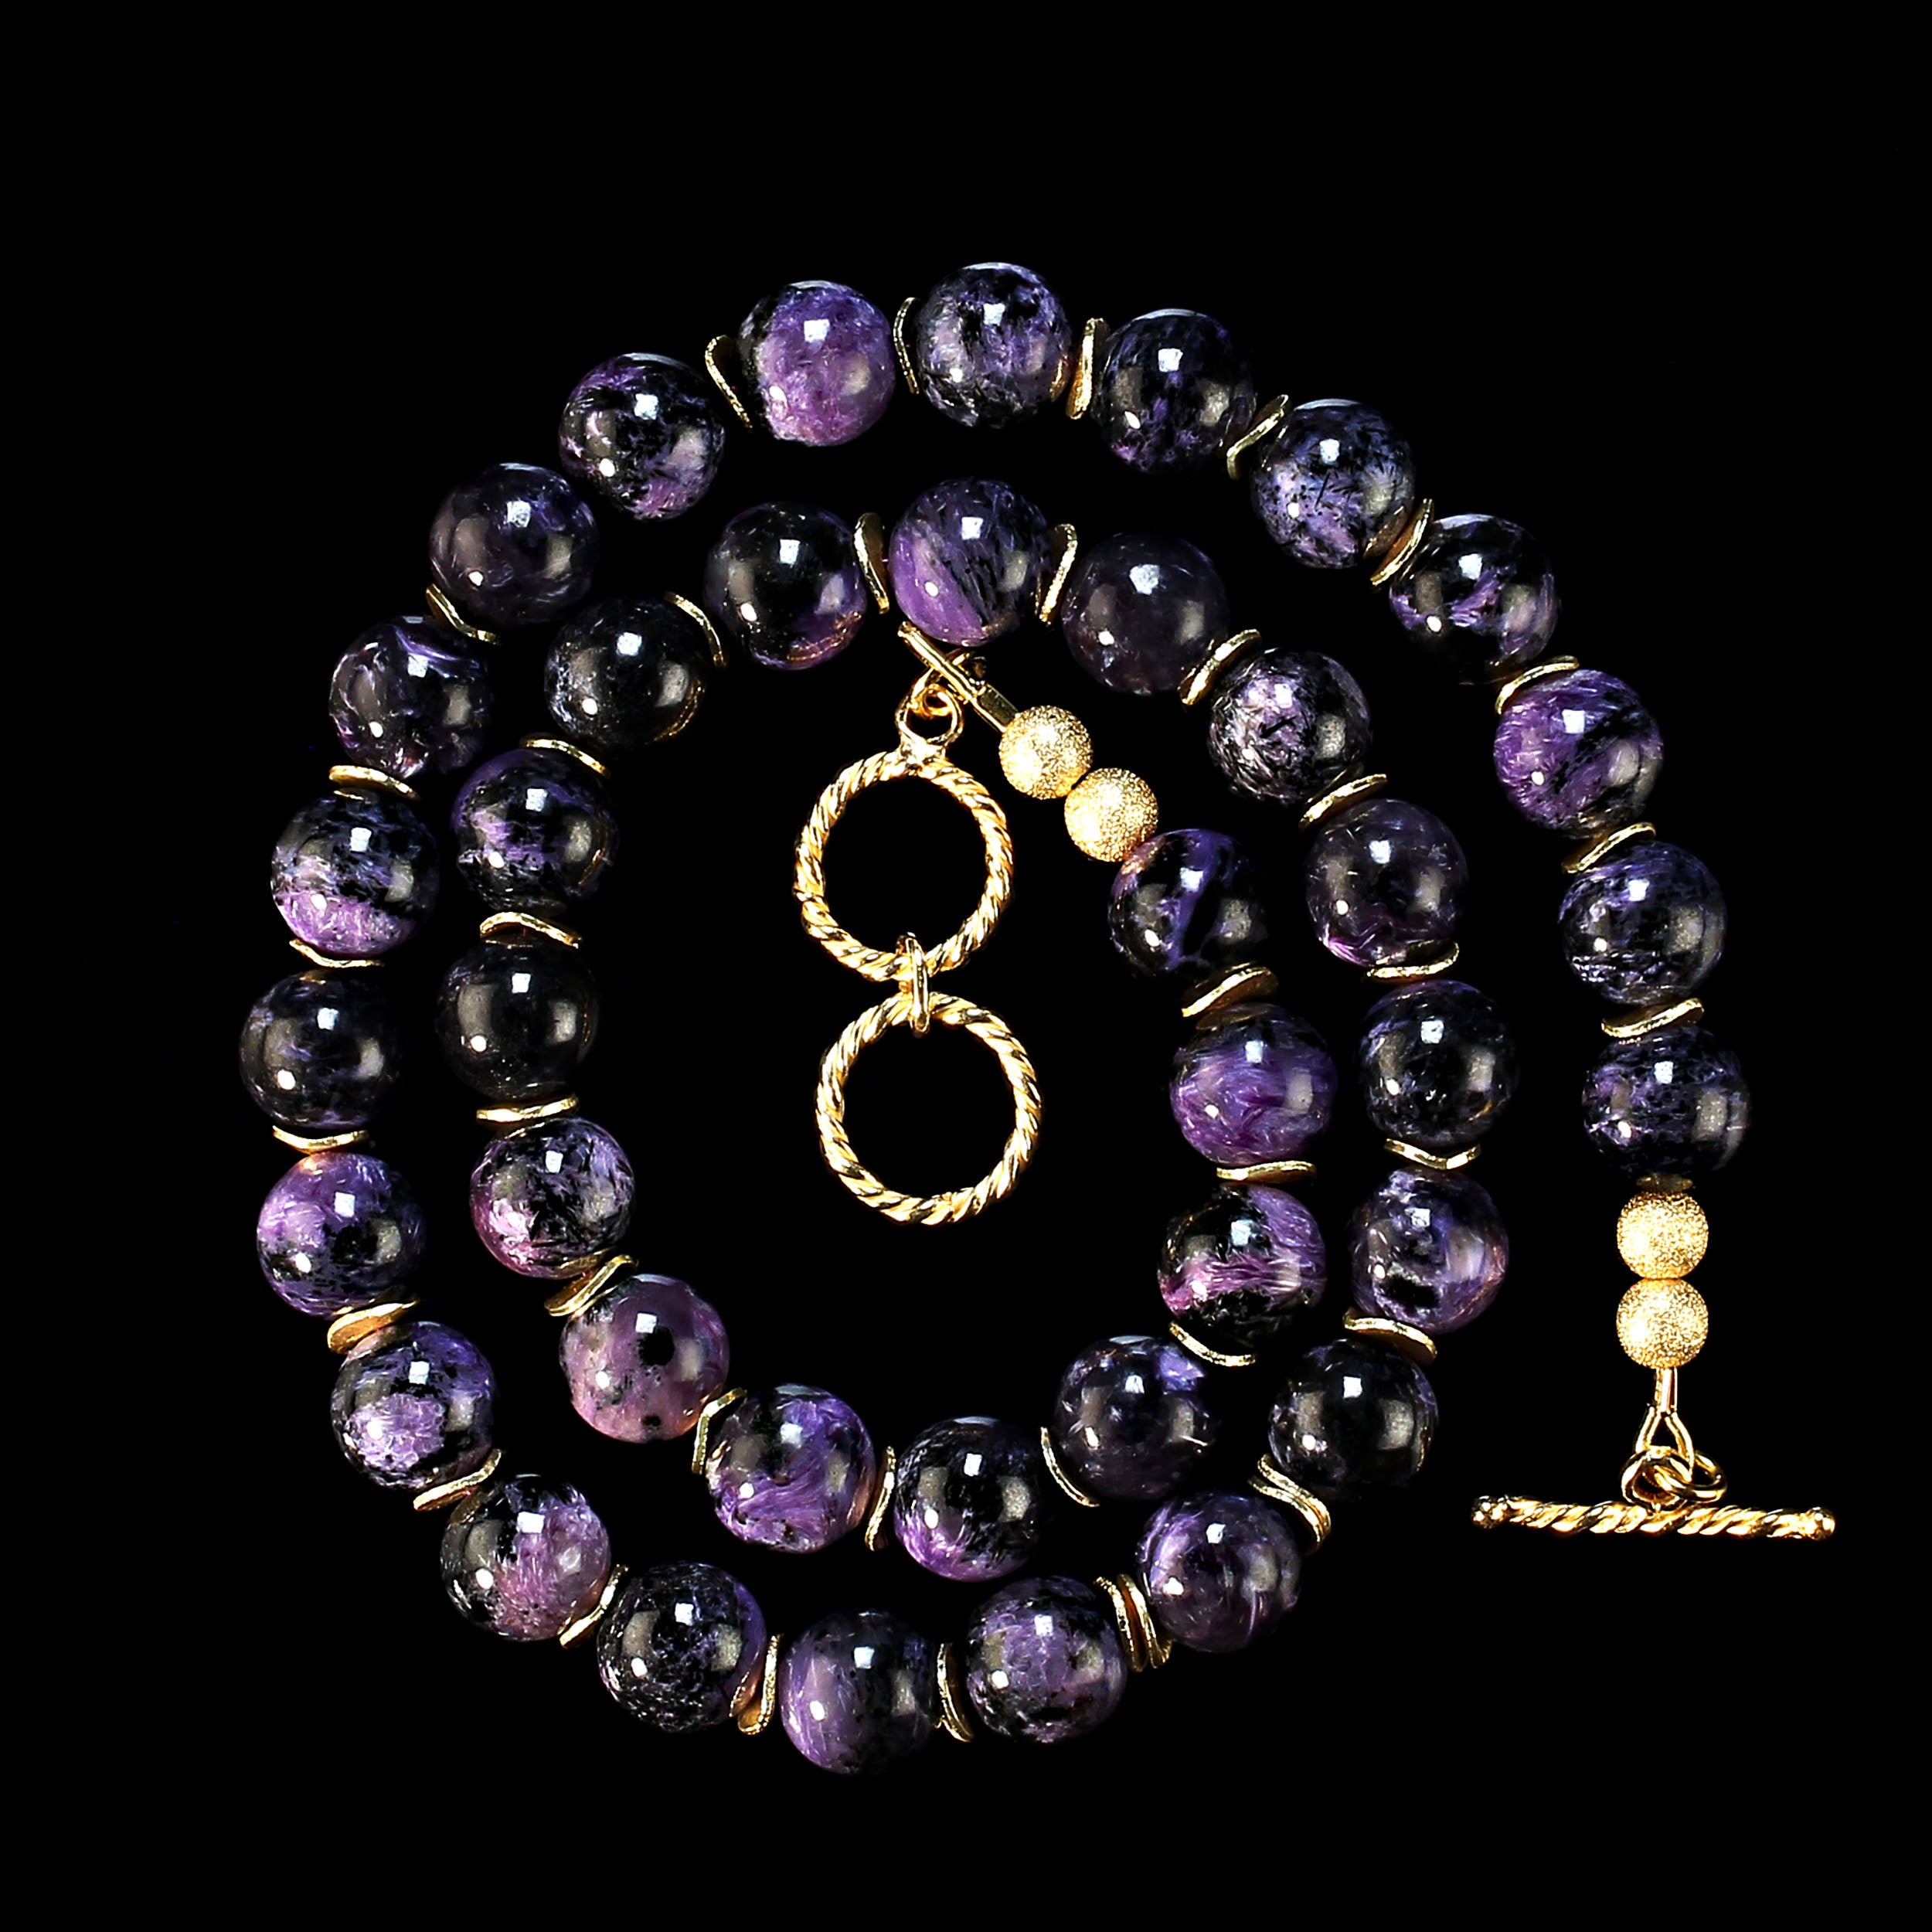  Purple Charoite Necklace with Goldy Accents  Perfect Gift!